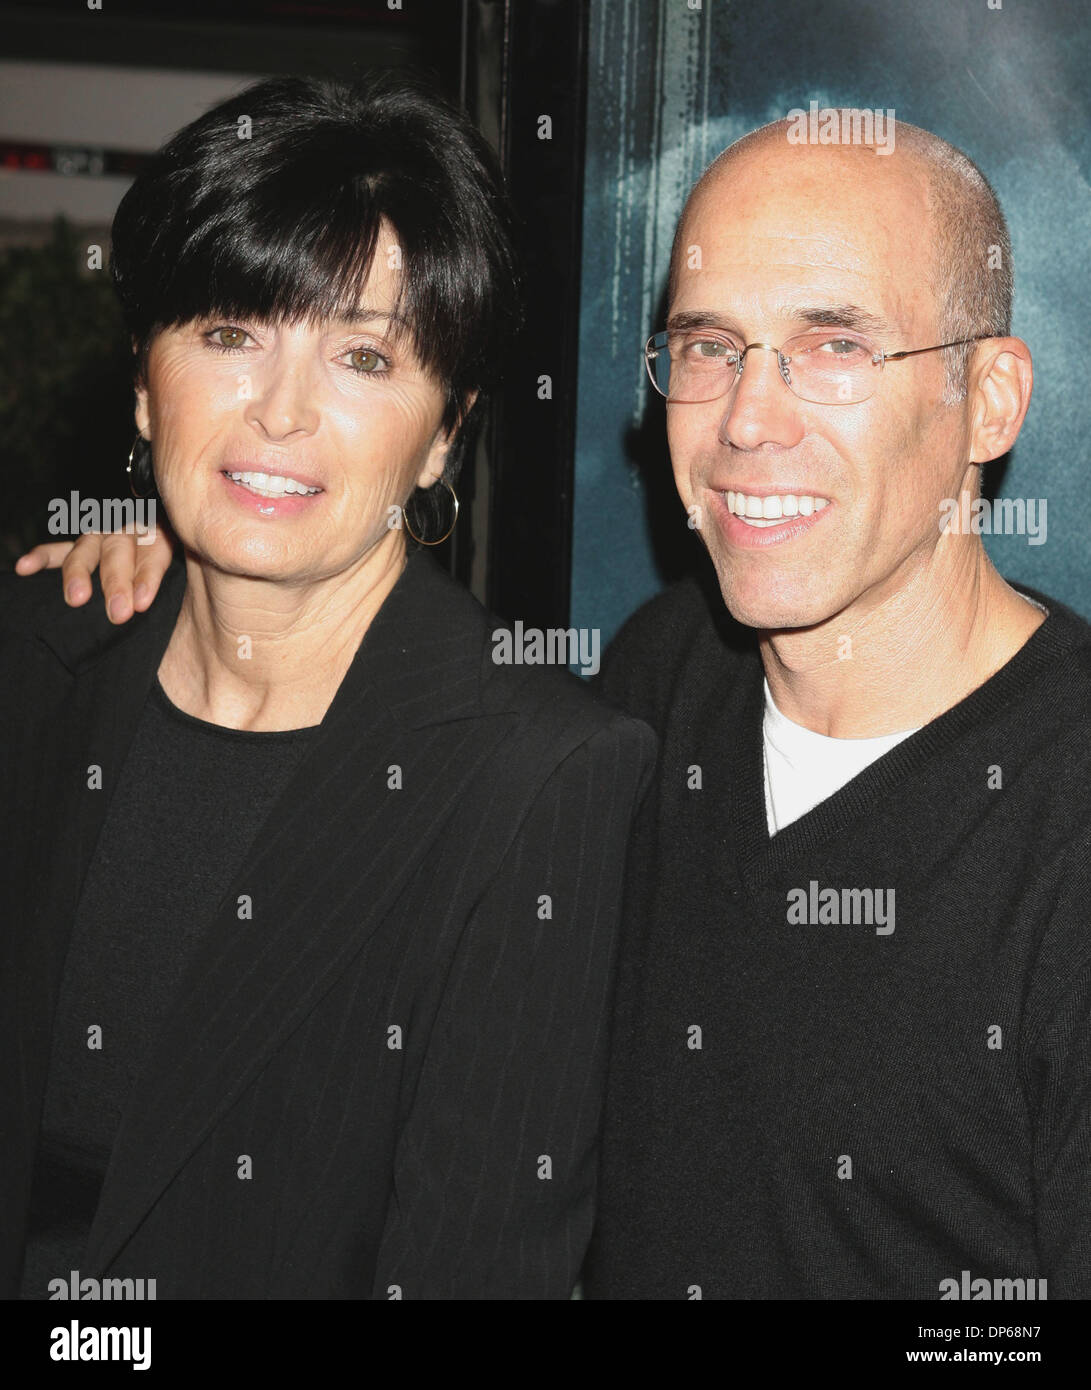 Oct 09, 2006; Los Angeles, CA, USA; Produer JEFFREY KATZENBERG and wife MARILYN at the 'Flags Of Our Fathers' Los Angeles Premiere held at the Academy Of Motion Picture Arts and Sciences. Mandatory Credit: Photo by Paul Fenton/ZUMA KPA.. (©) Copyright 2006 by Paul Fenton Stock Photo